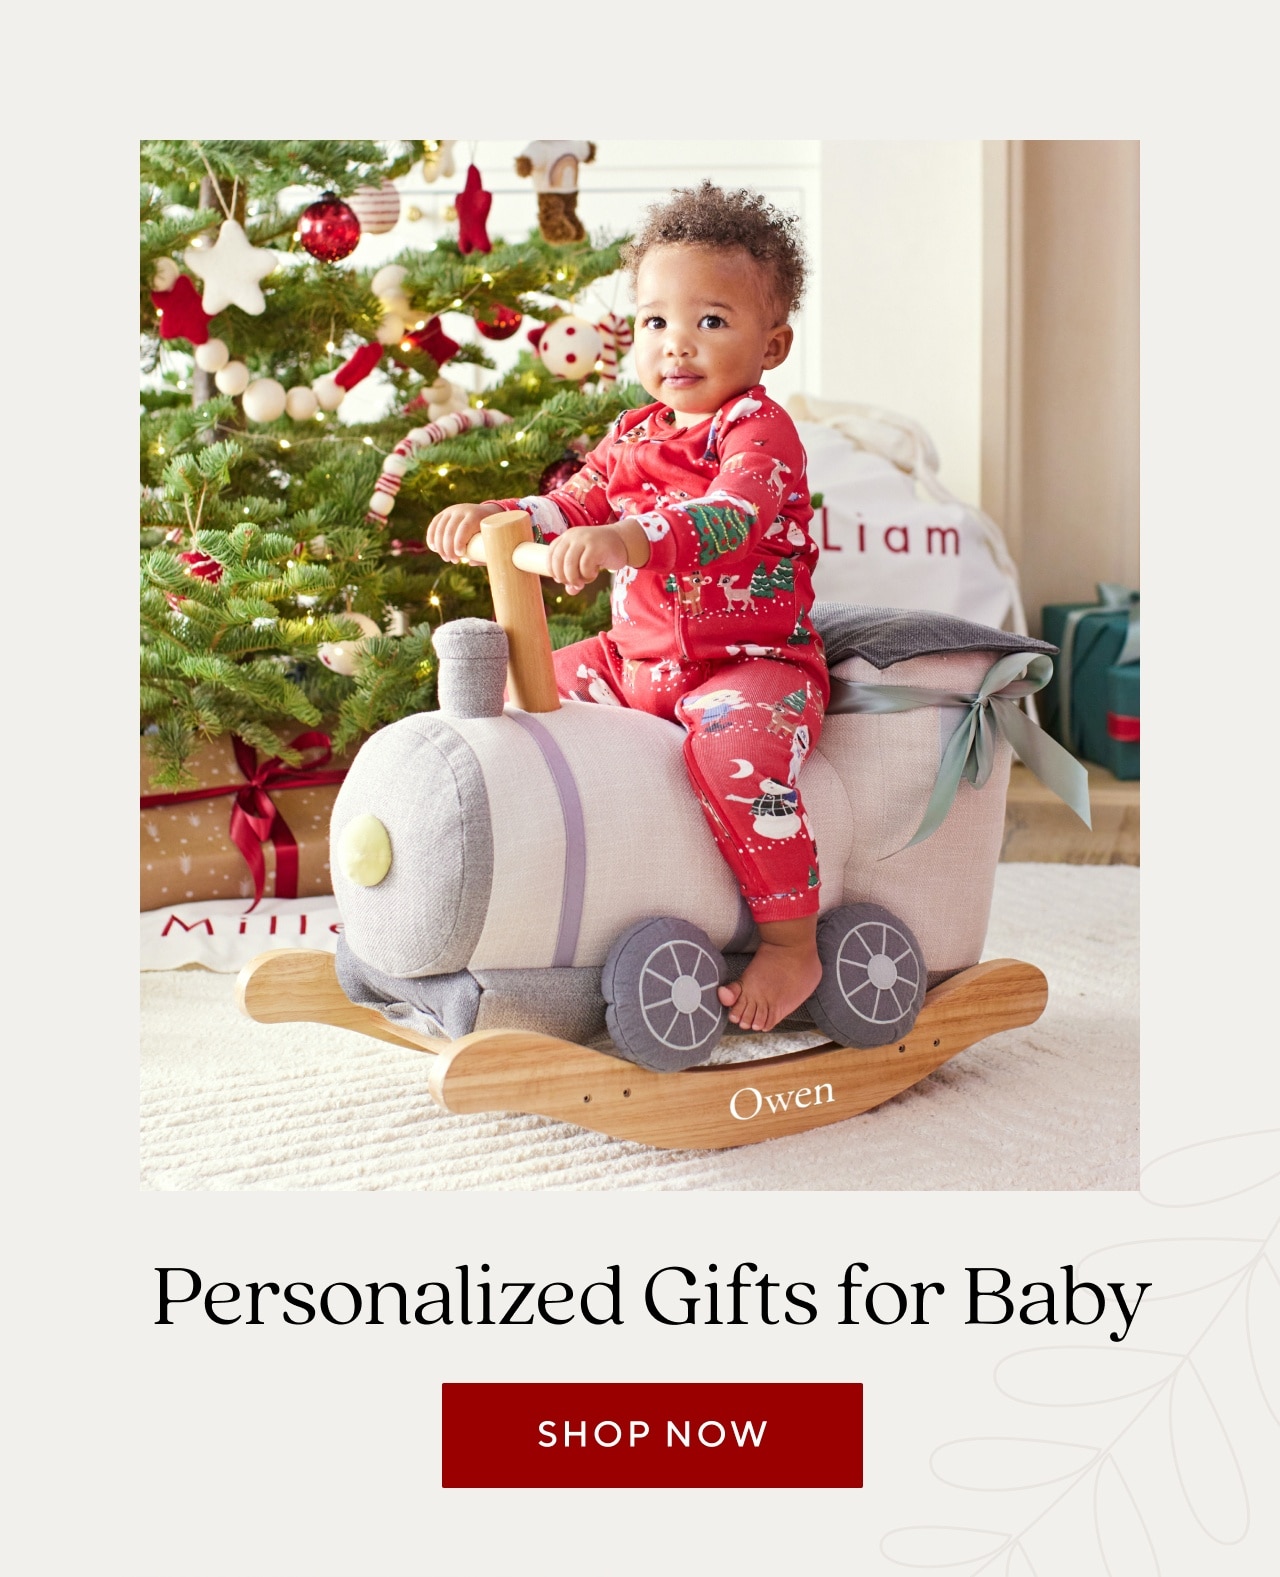 PERSONALIZED GIFTS FOR BABY